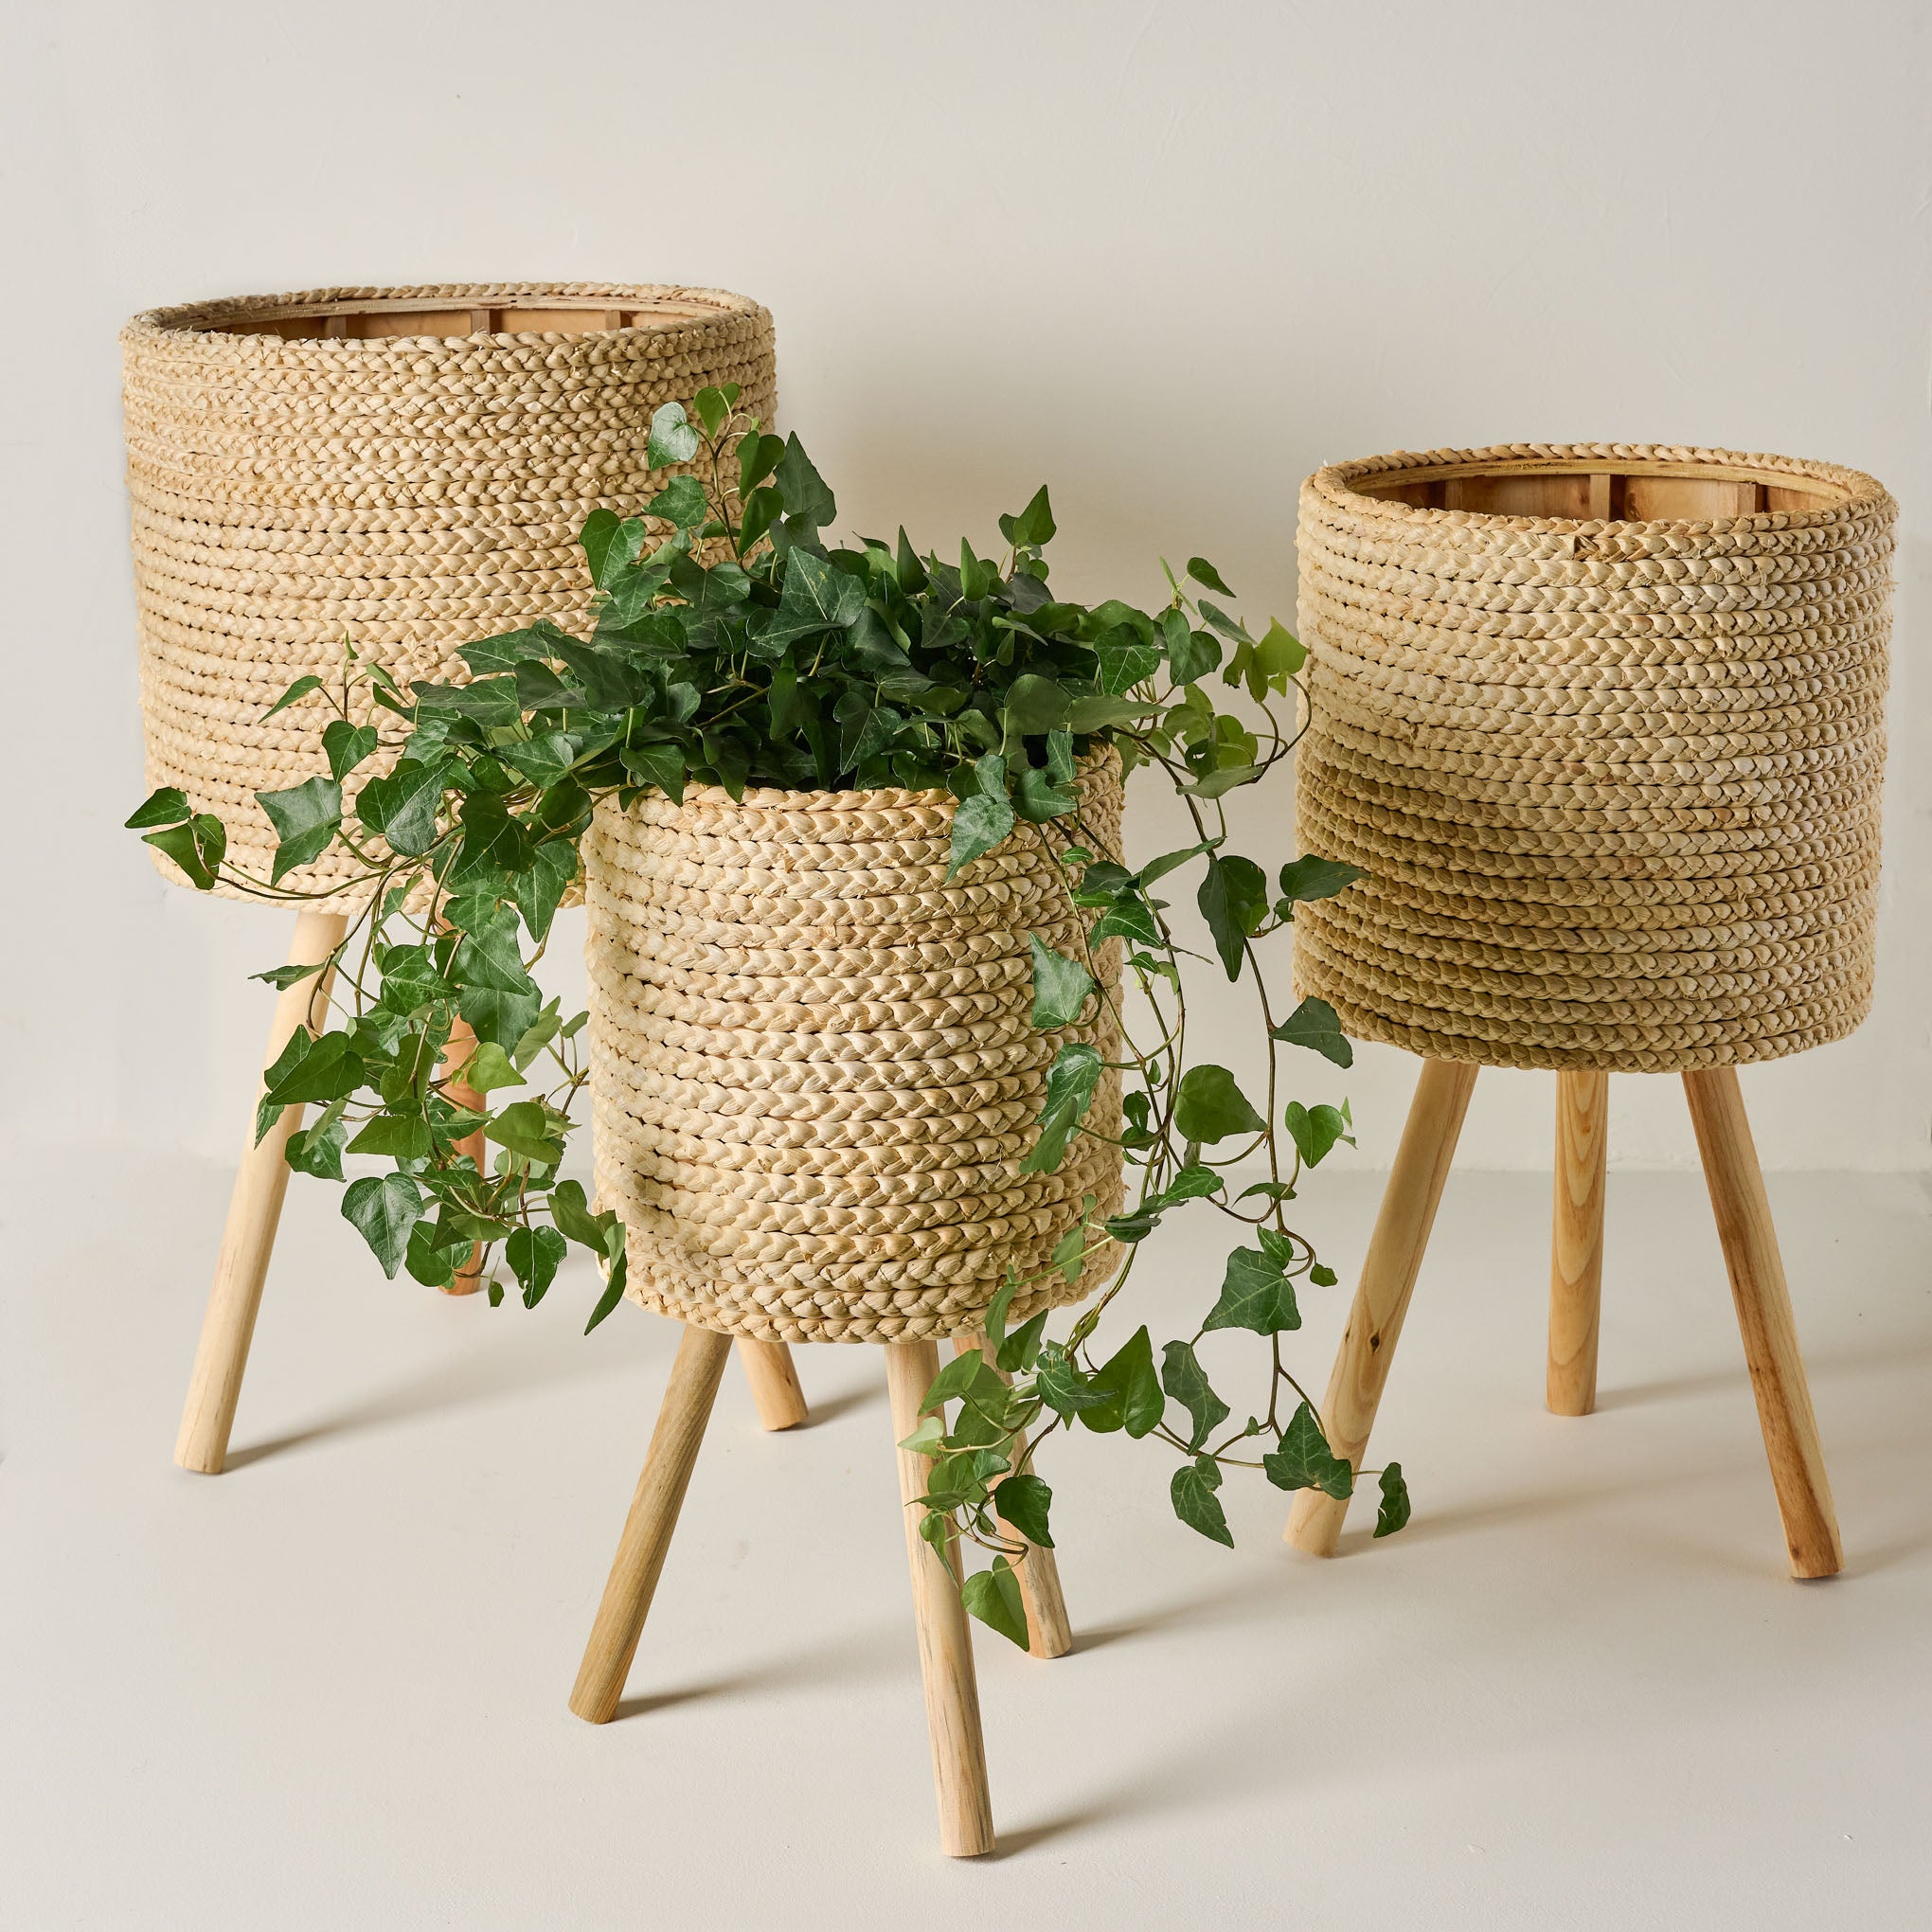 Bleached Woven Plant Stands in all three sizes with a plant Items range from $38.00 to $62.00